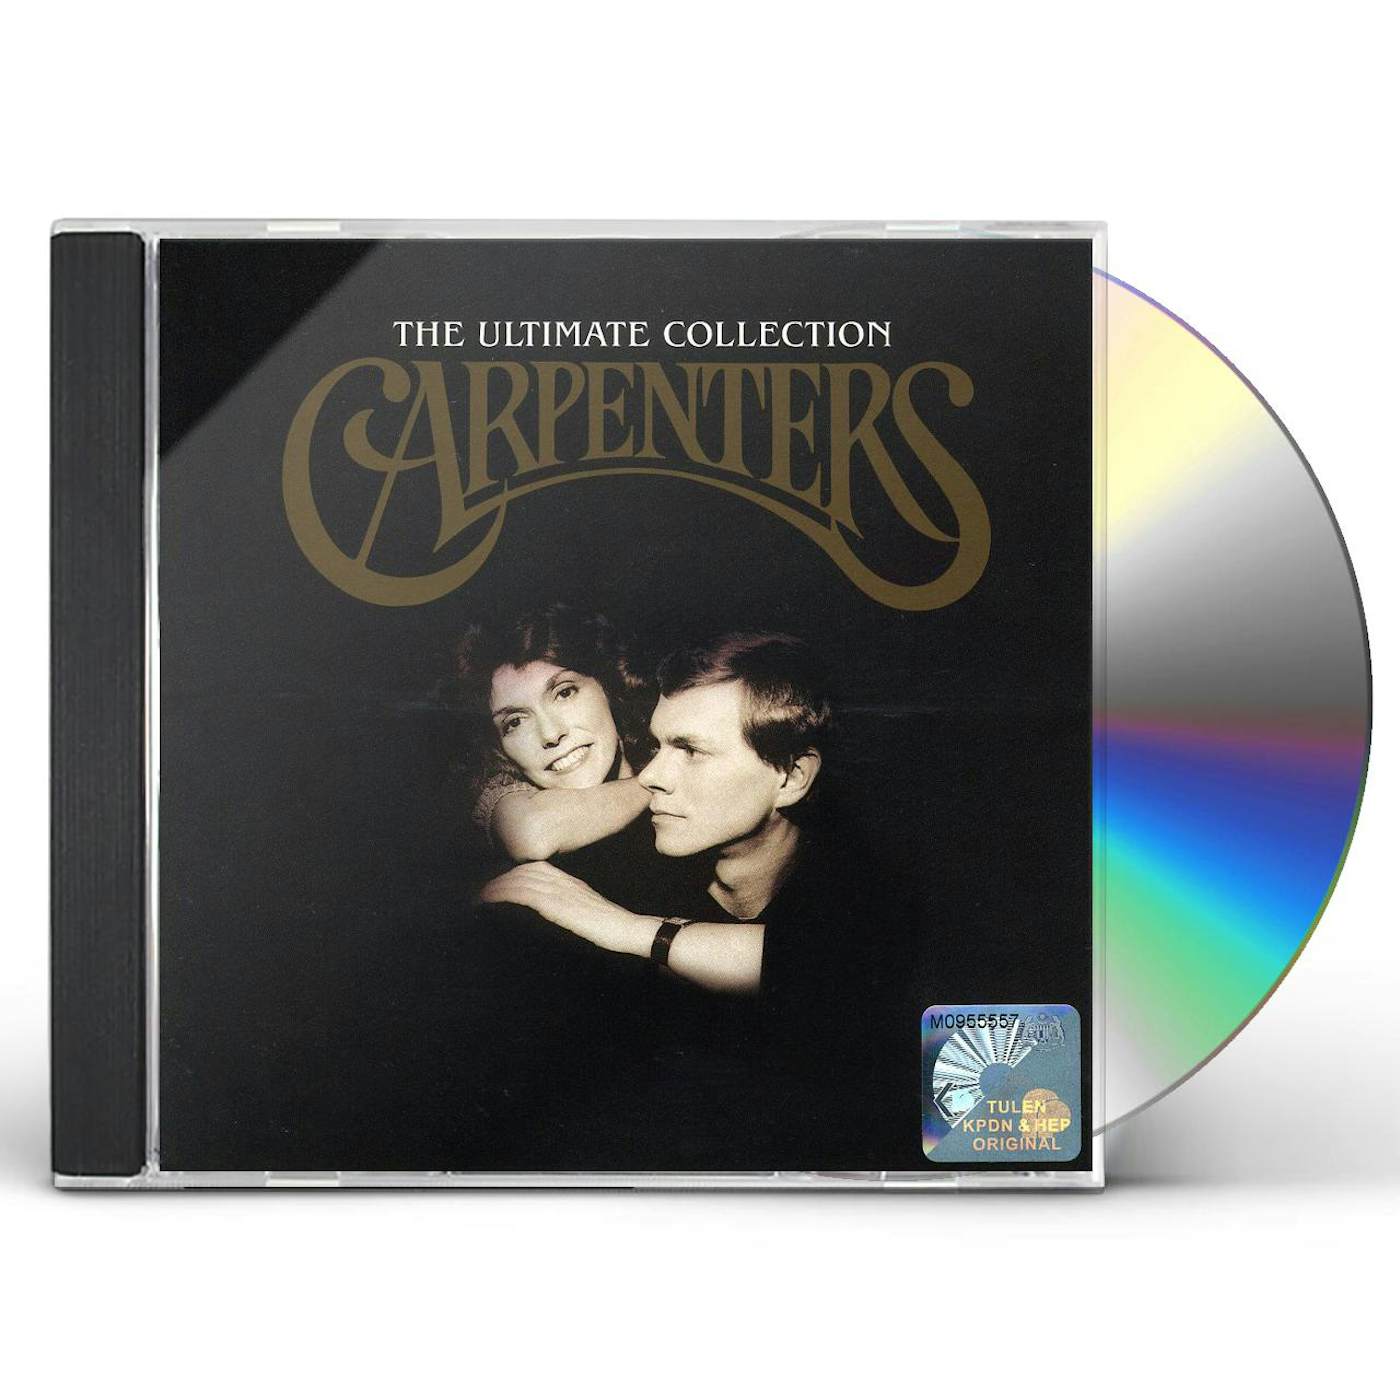 Carpenters ULTIMATE COLLECTION CD